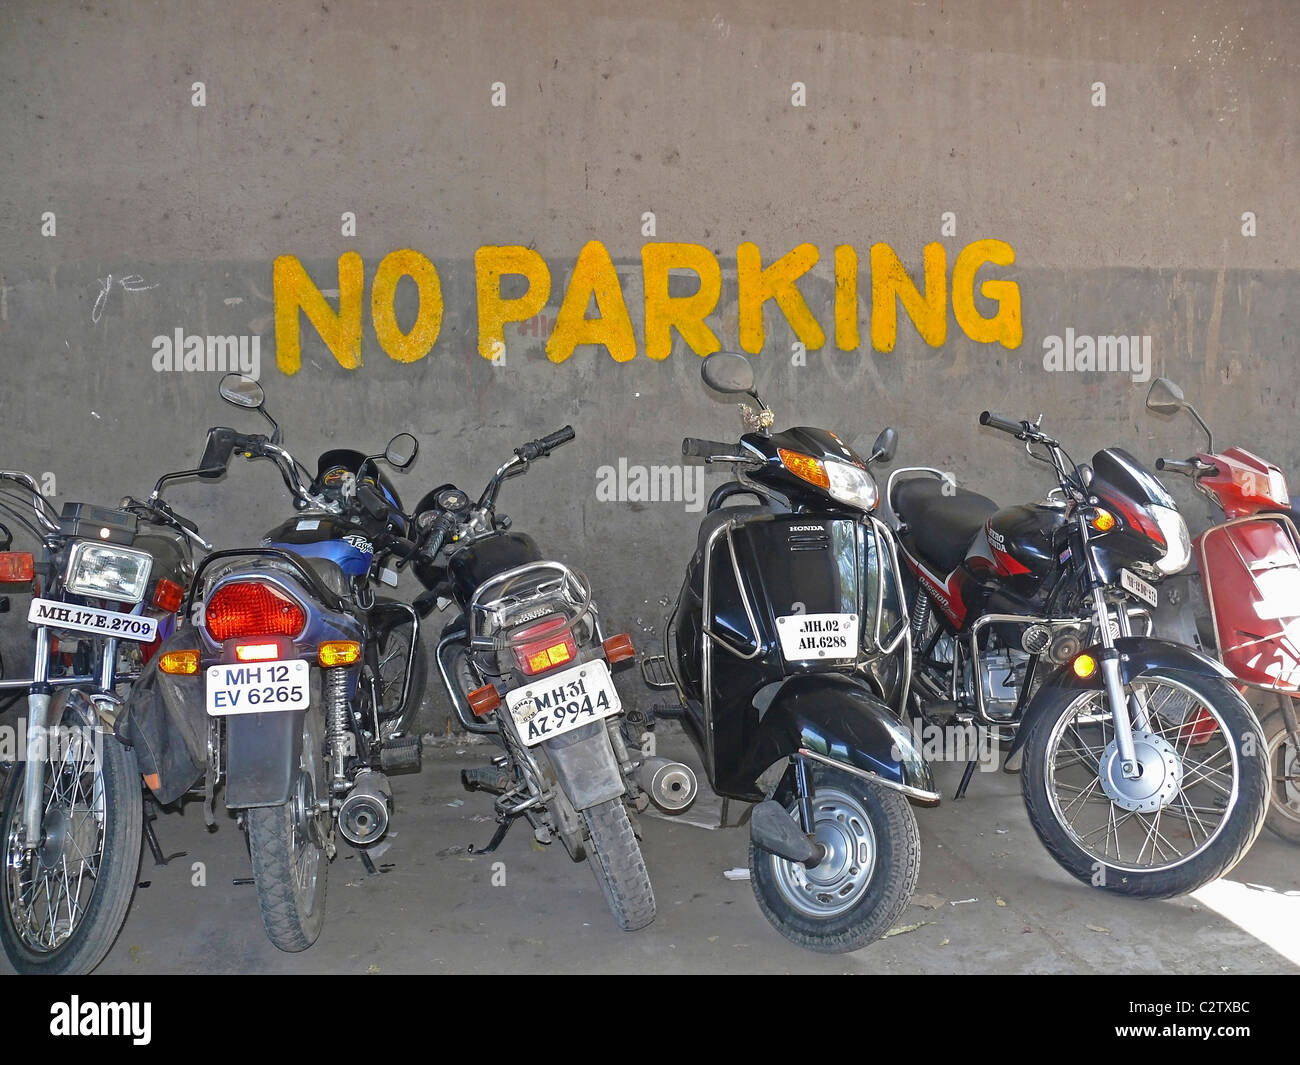 Motorcycles, bikes are parked at the place of No parking, Pune, Maharashtra, India Stock Photo